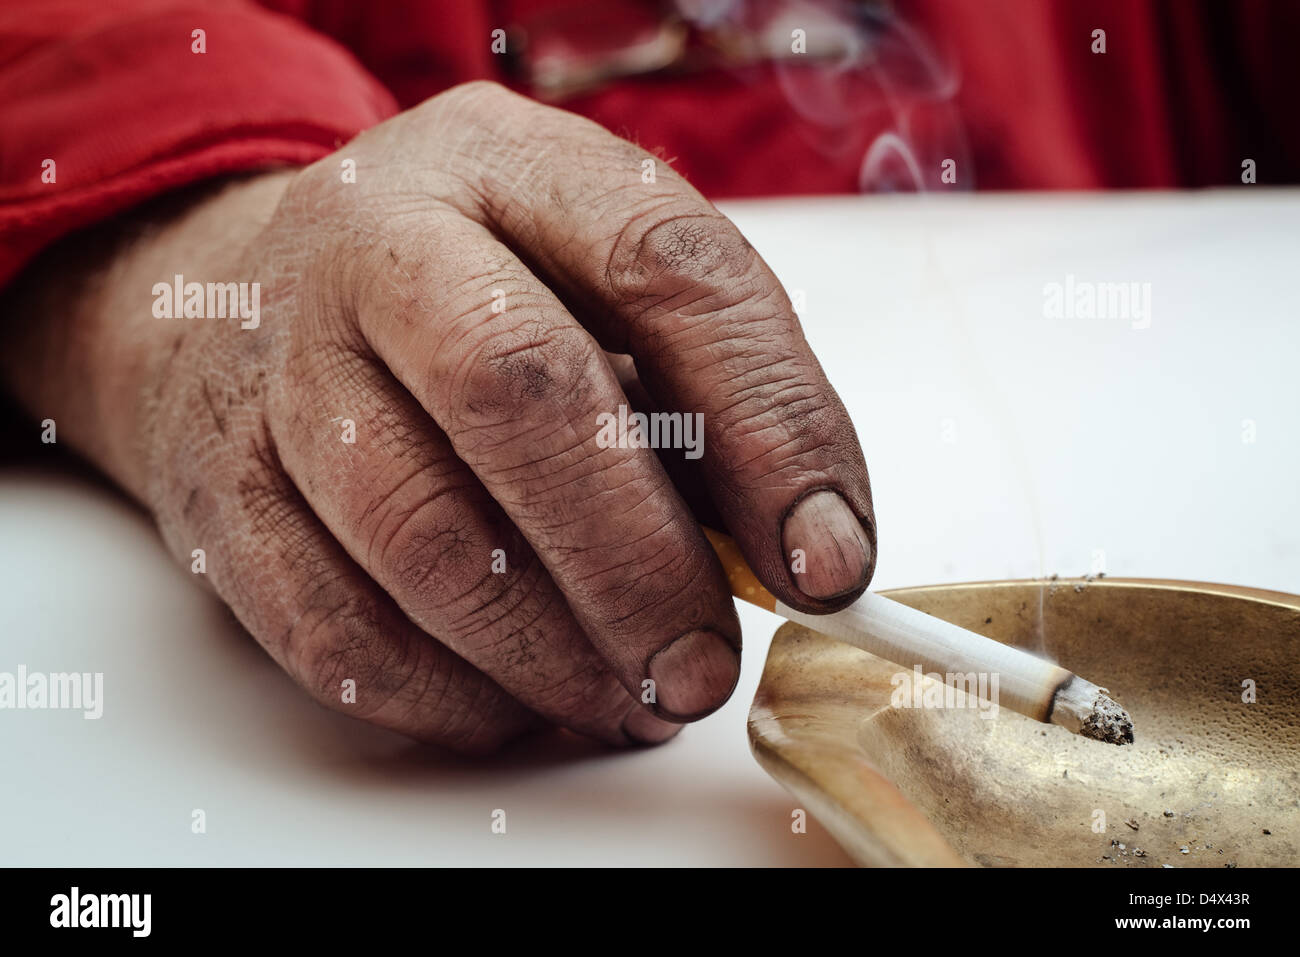 Dirty male hand holding smoking cigarette in an ashtray. Stock Photo